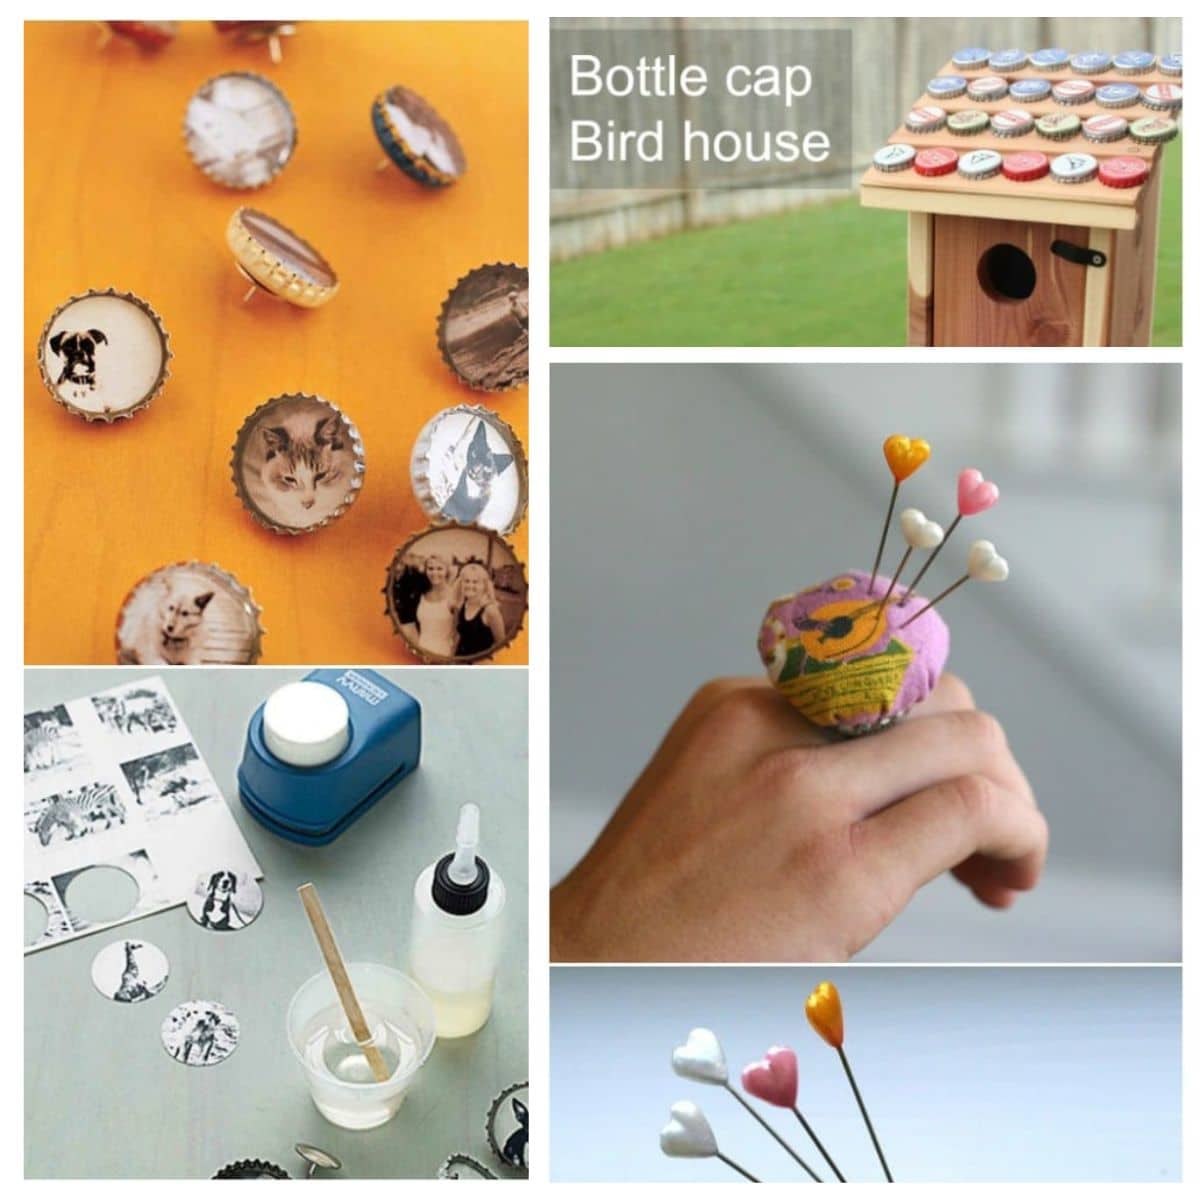 Crafty Bottle Cap Creations: Over 25 Gift and Decor Ideas - Mod Podge Rocks